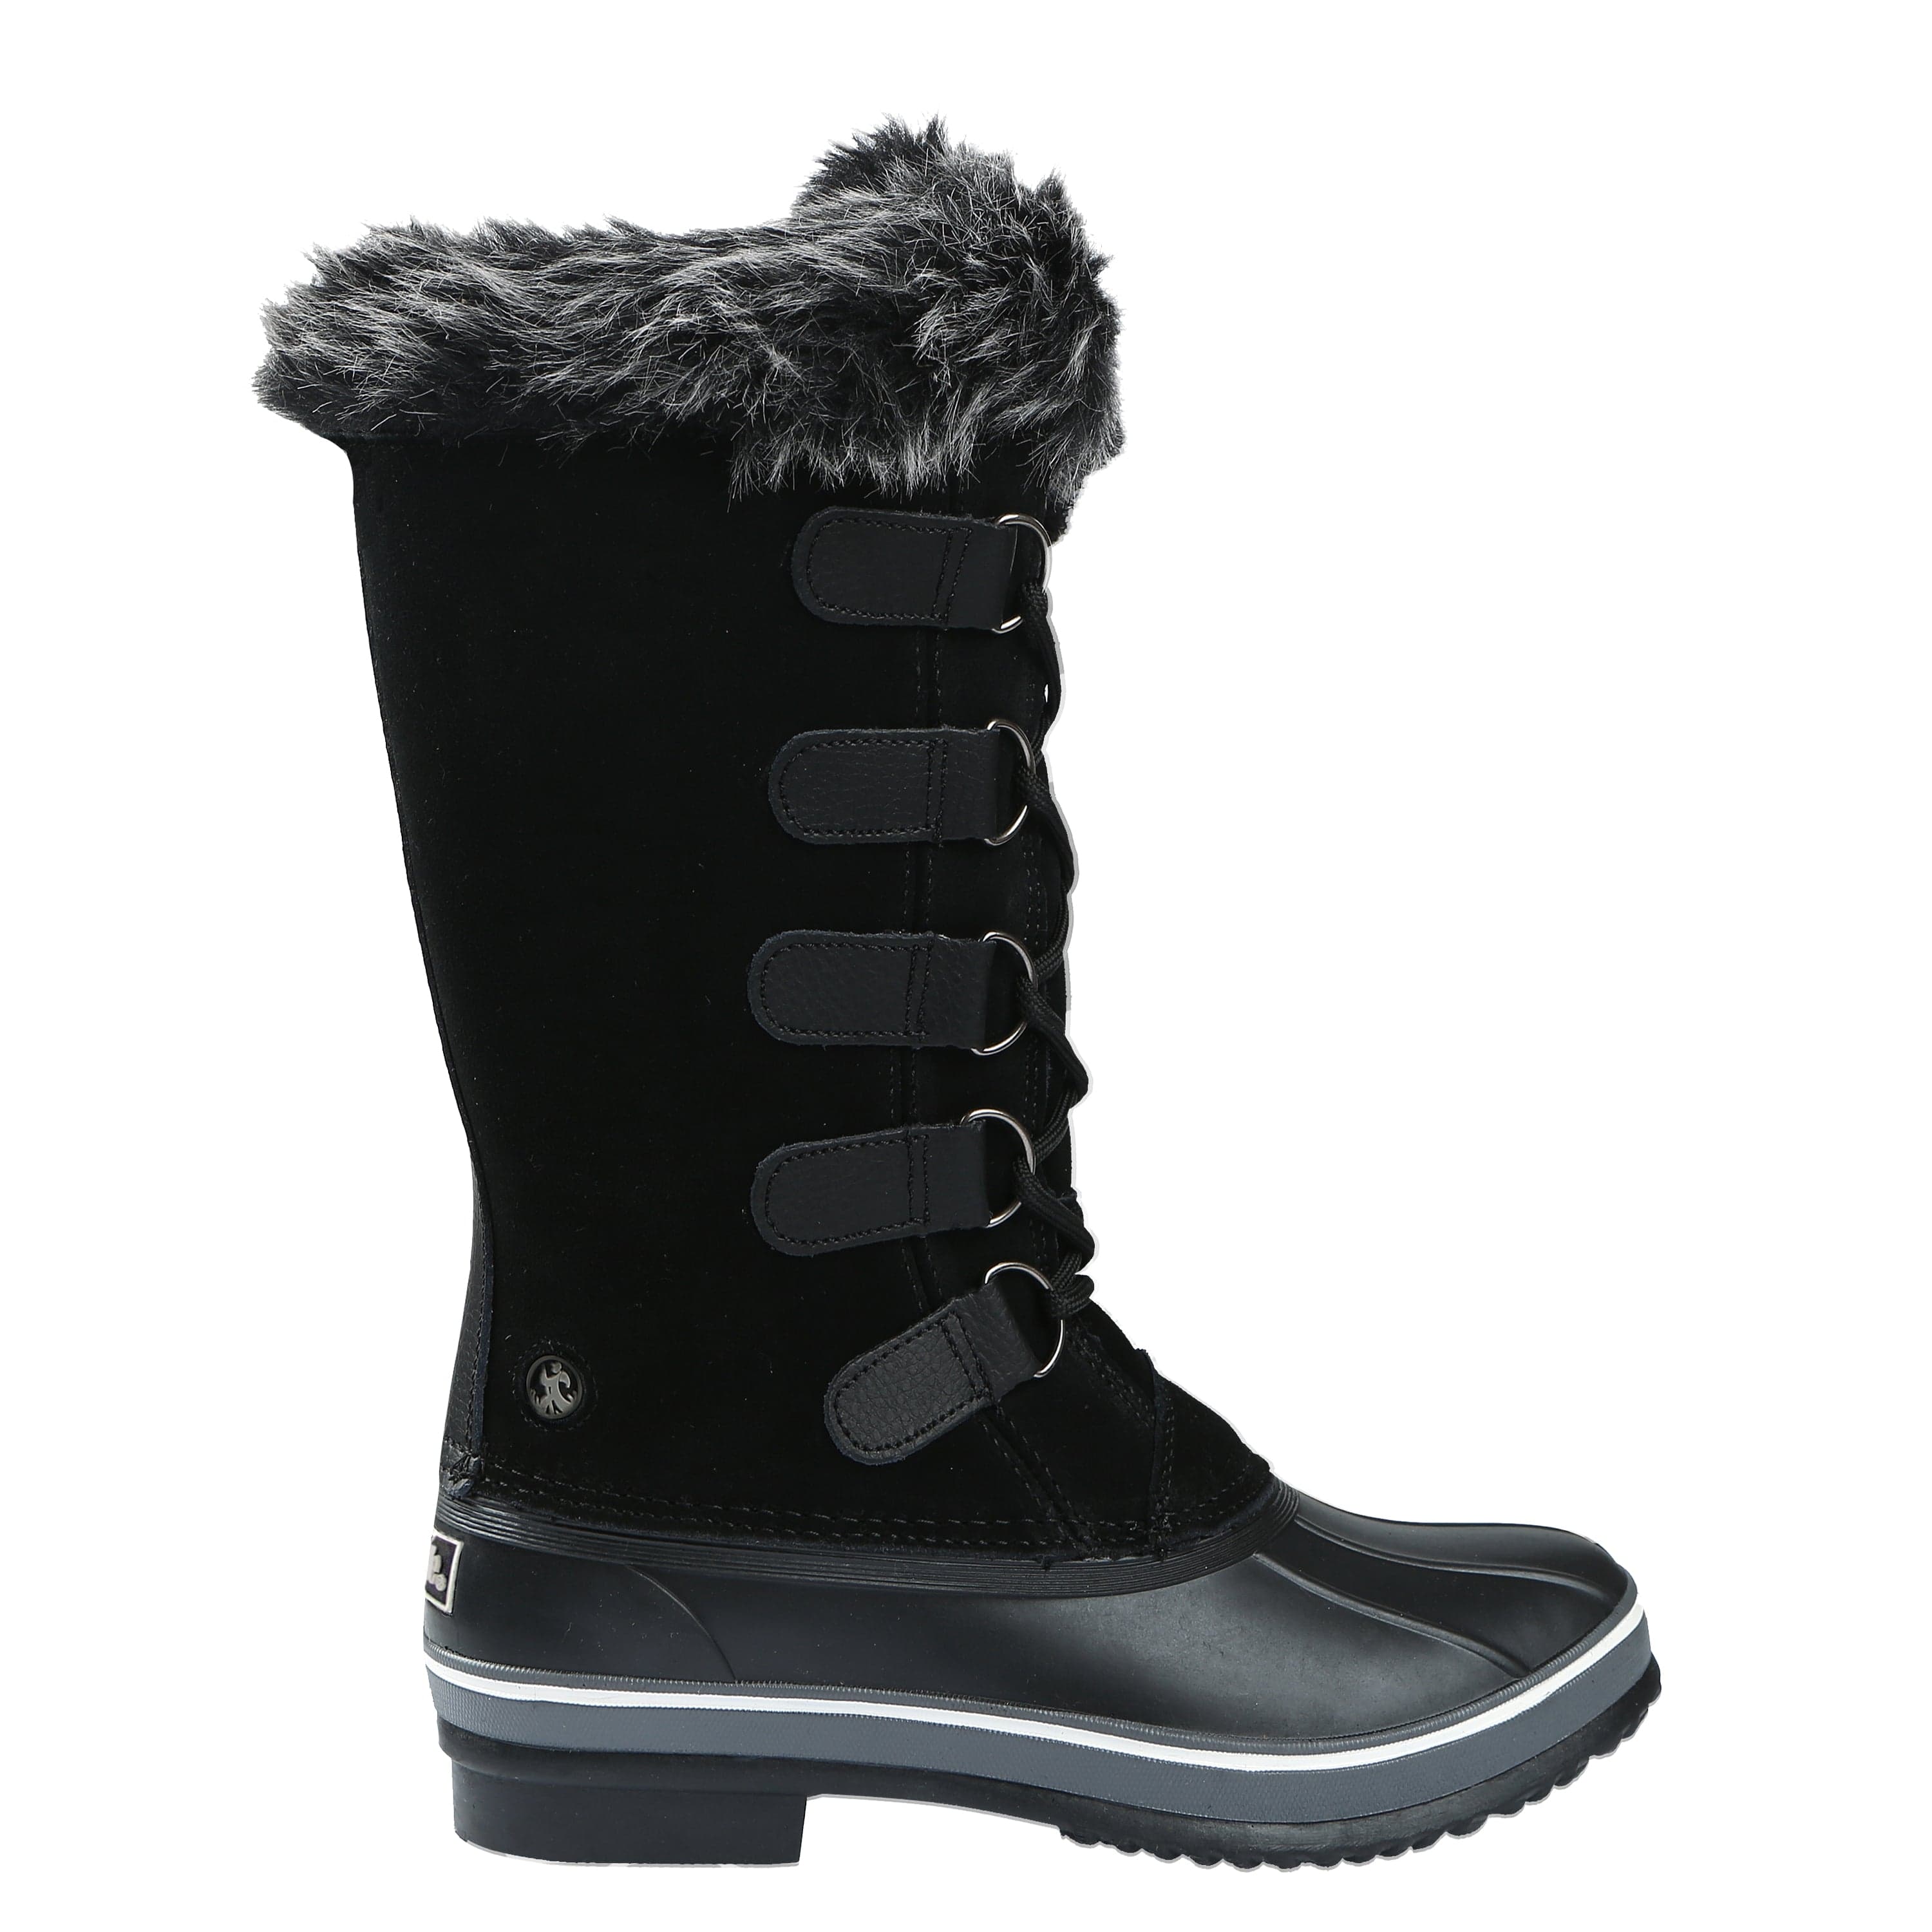 black snow boots with fur lace up women